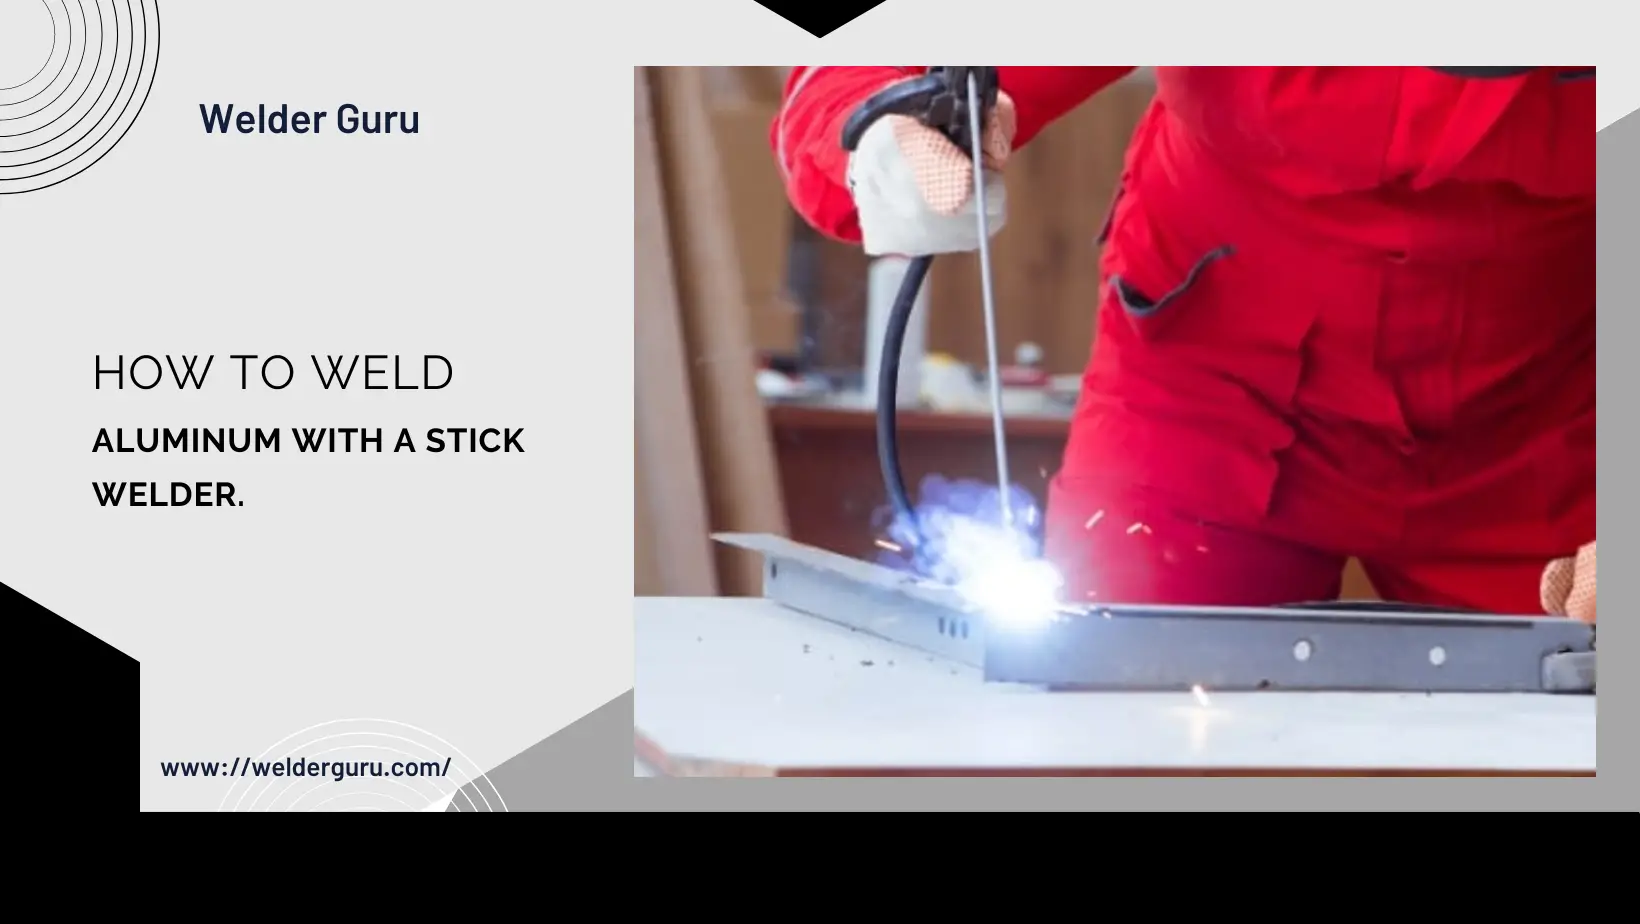 How to weld aluminum with a stick welder.